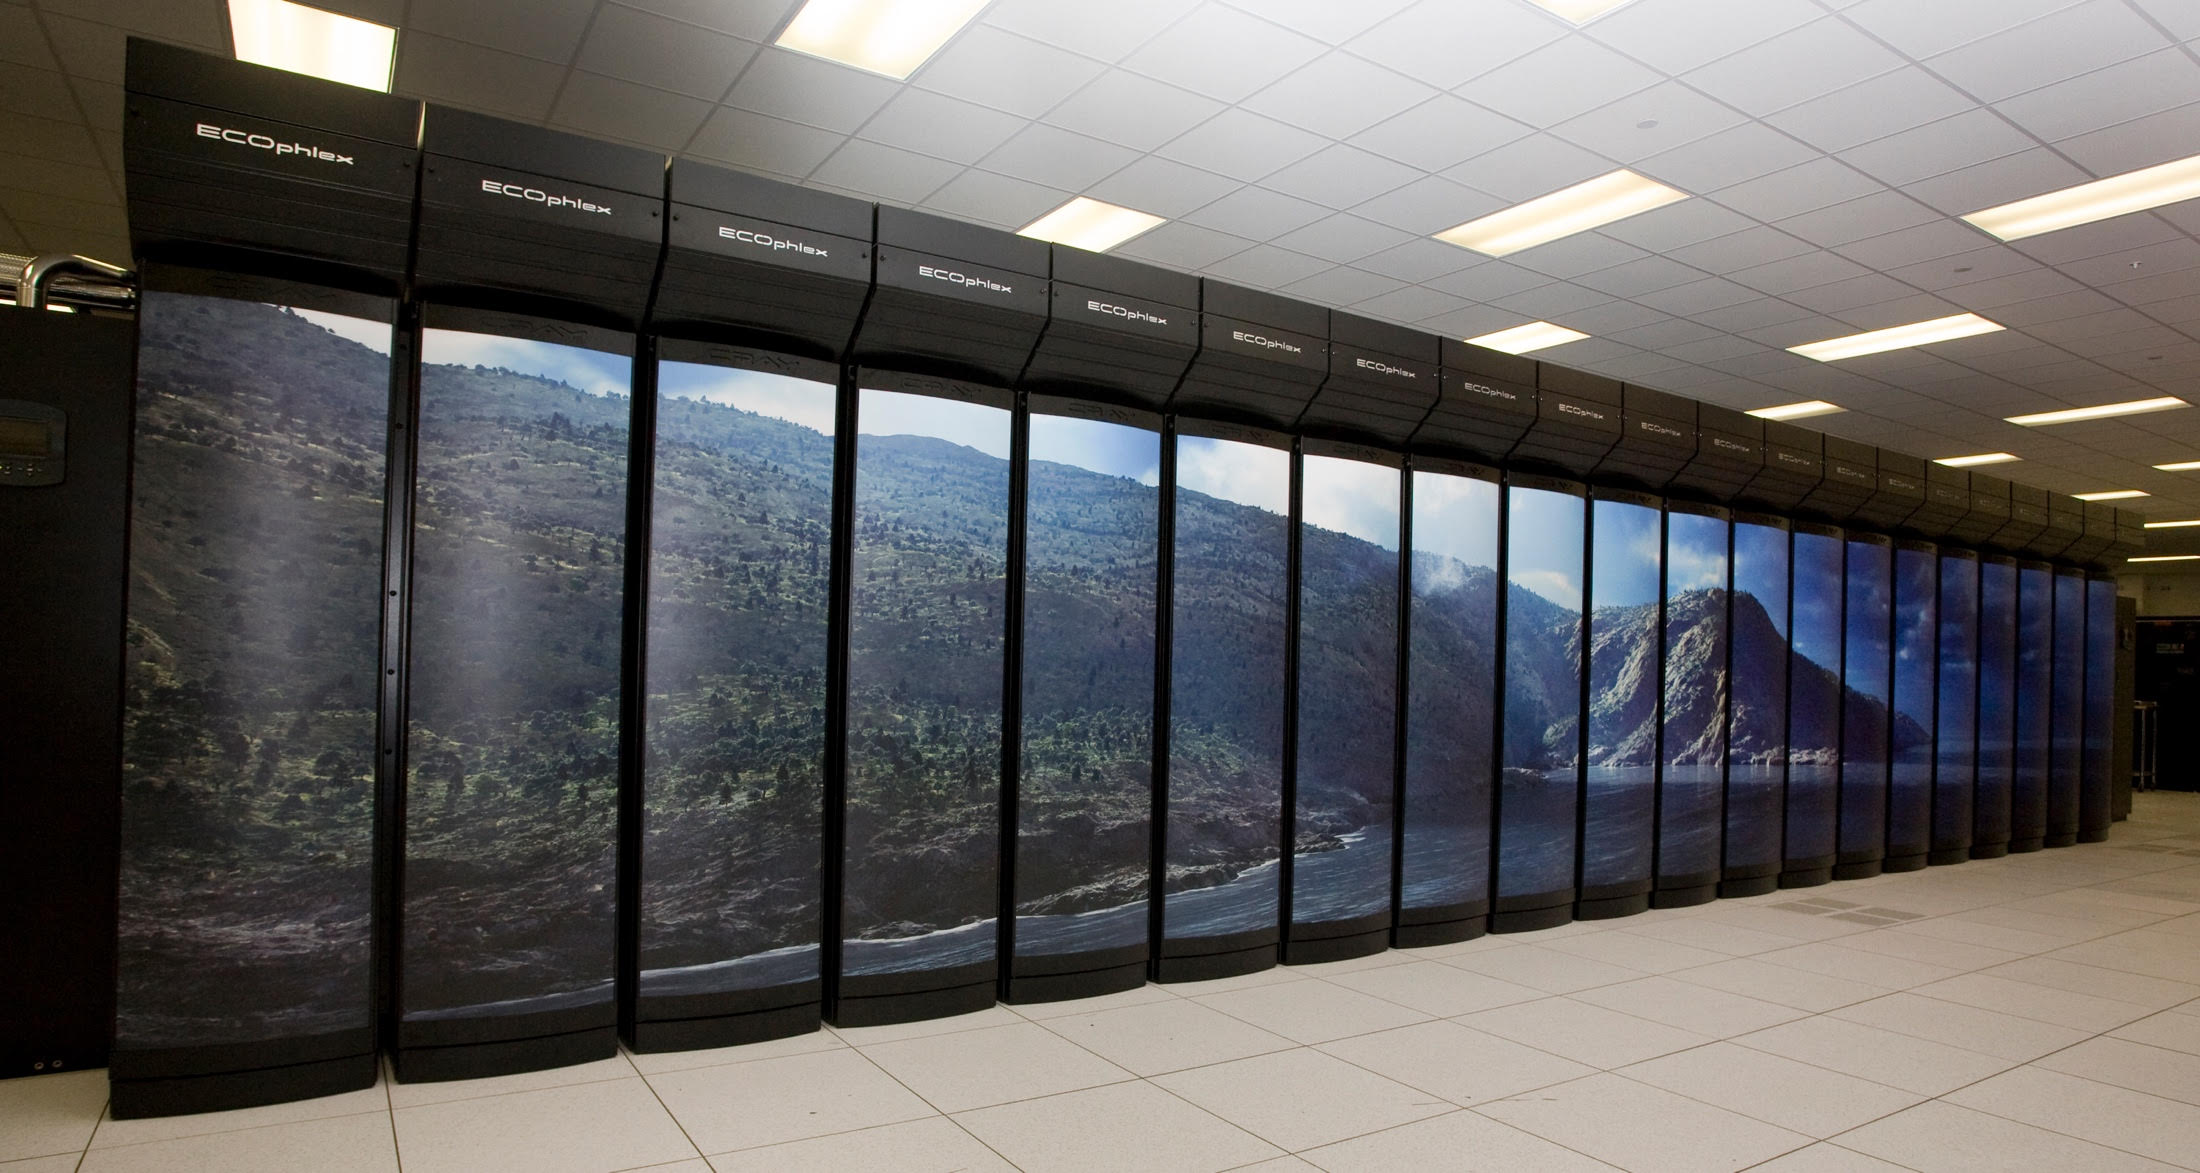 Image is of the NOAA Gaea supercomputer located in Oak Ridge, TN. Gaea is a supercomputer with 143,936 Intel cores and consists of multiple black cabinets (19 are shown in the image). The racks of hardware components are stacked vertically to save space, allow for ease of connecting the many nodes and cores of the supercomputer, and to improve efficiency in cooling. In this picture, an artwork is placed in front of the black cabinets showing picturesque hilly coastal scene which has been divided up on the